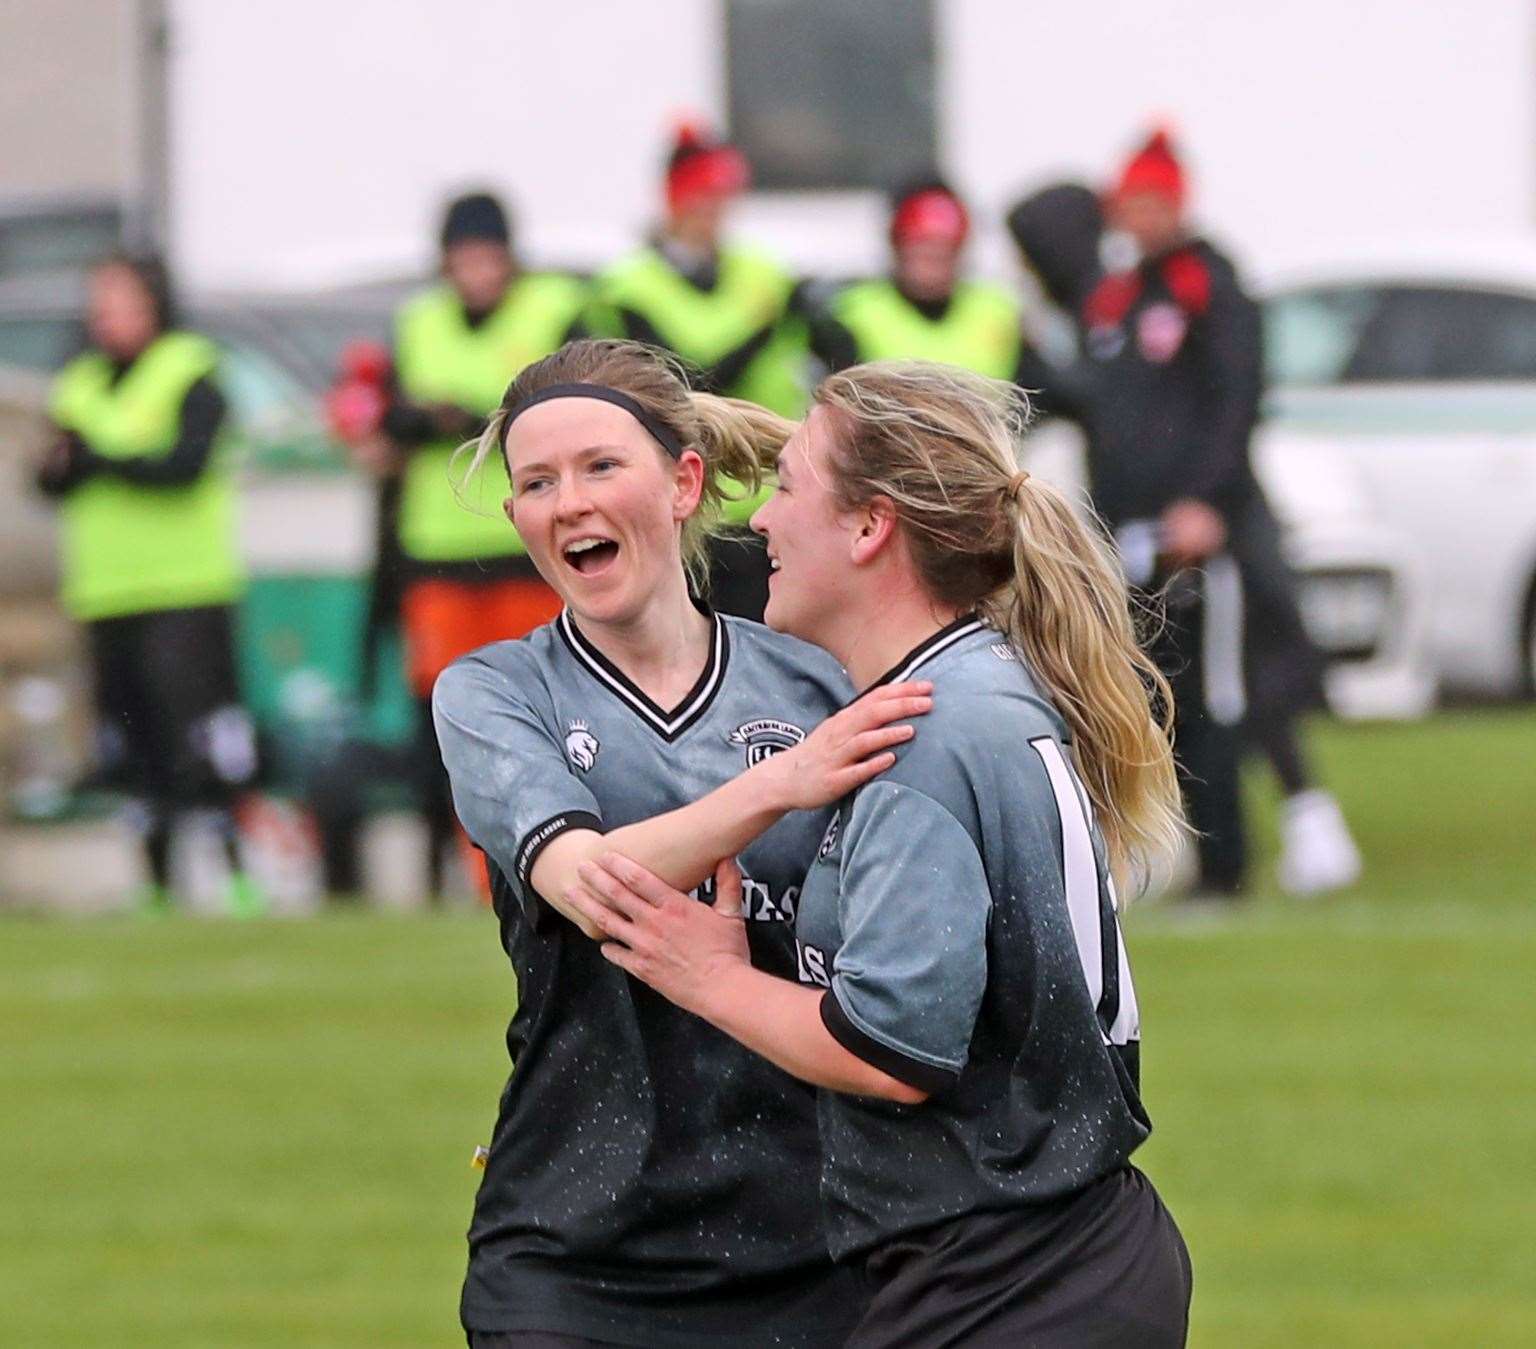 Carly Erridge (left) is congratulated by Kerrie Martin on scoring her 2nd goal